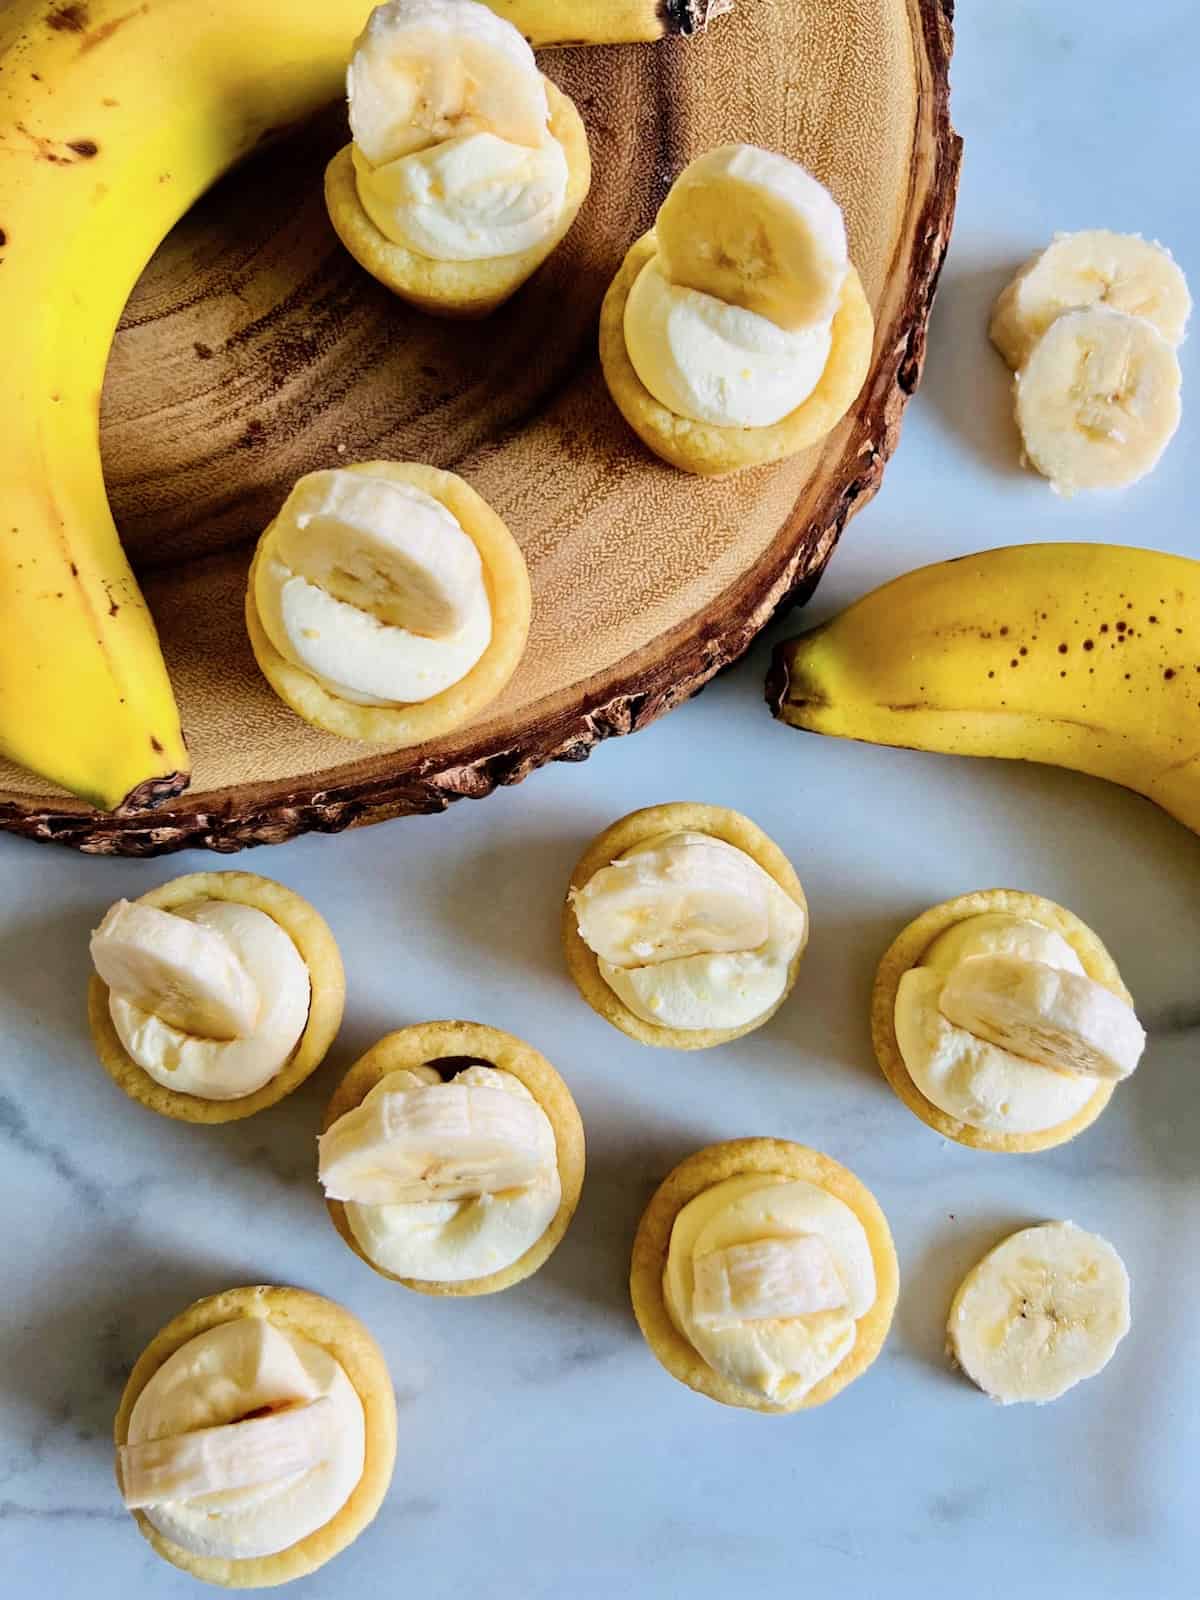 Banana Cream Pie Cookie Cups Topped with banana slices ready to eat on counter and wooden board with bananas next to them.